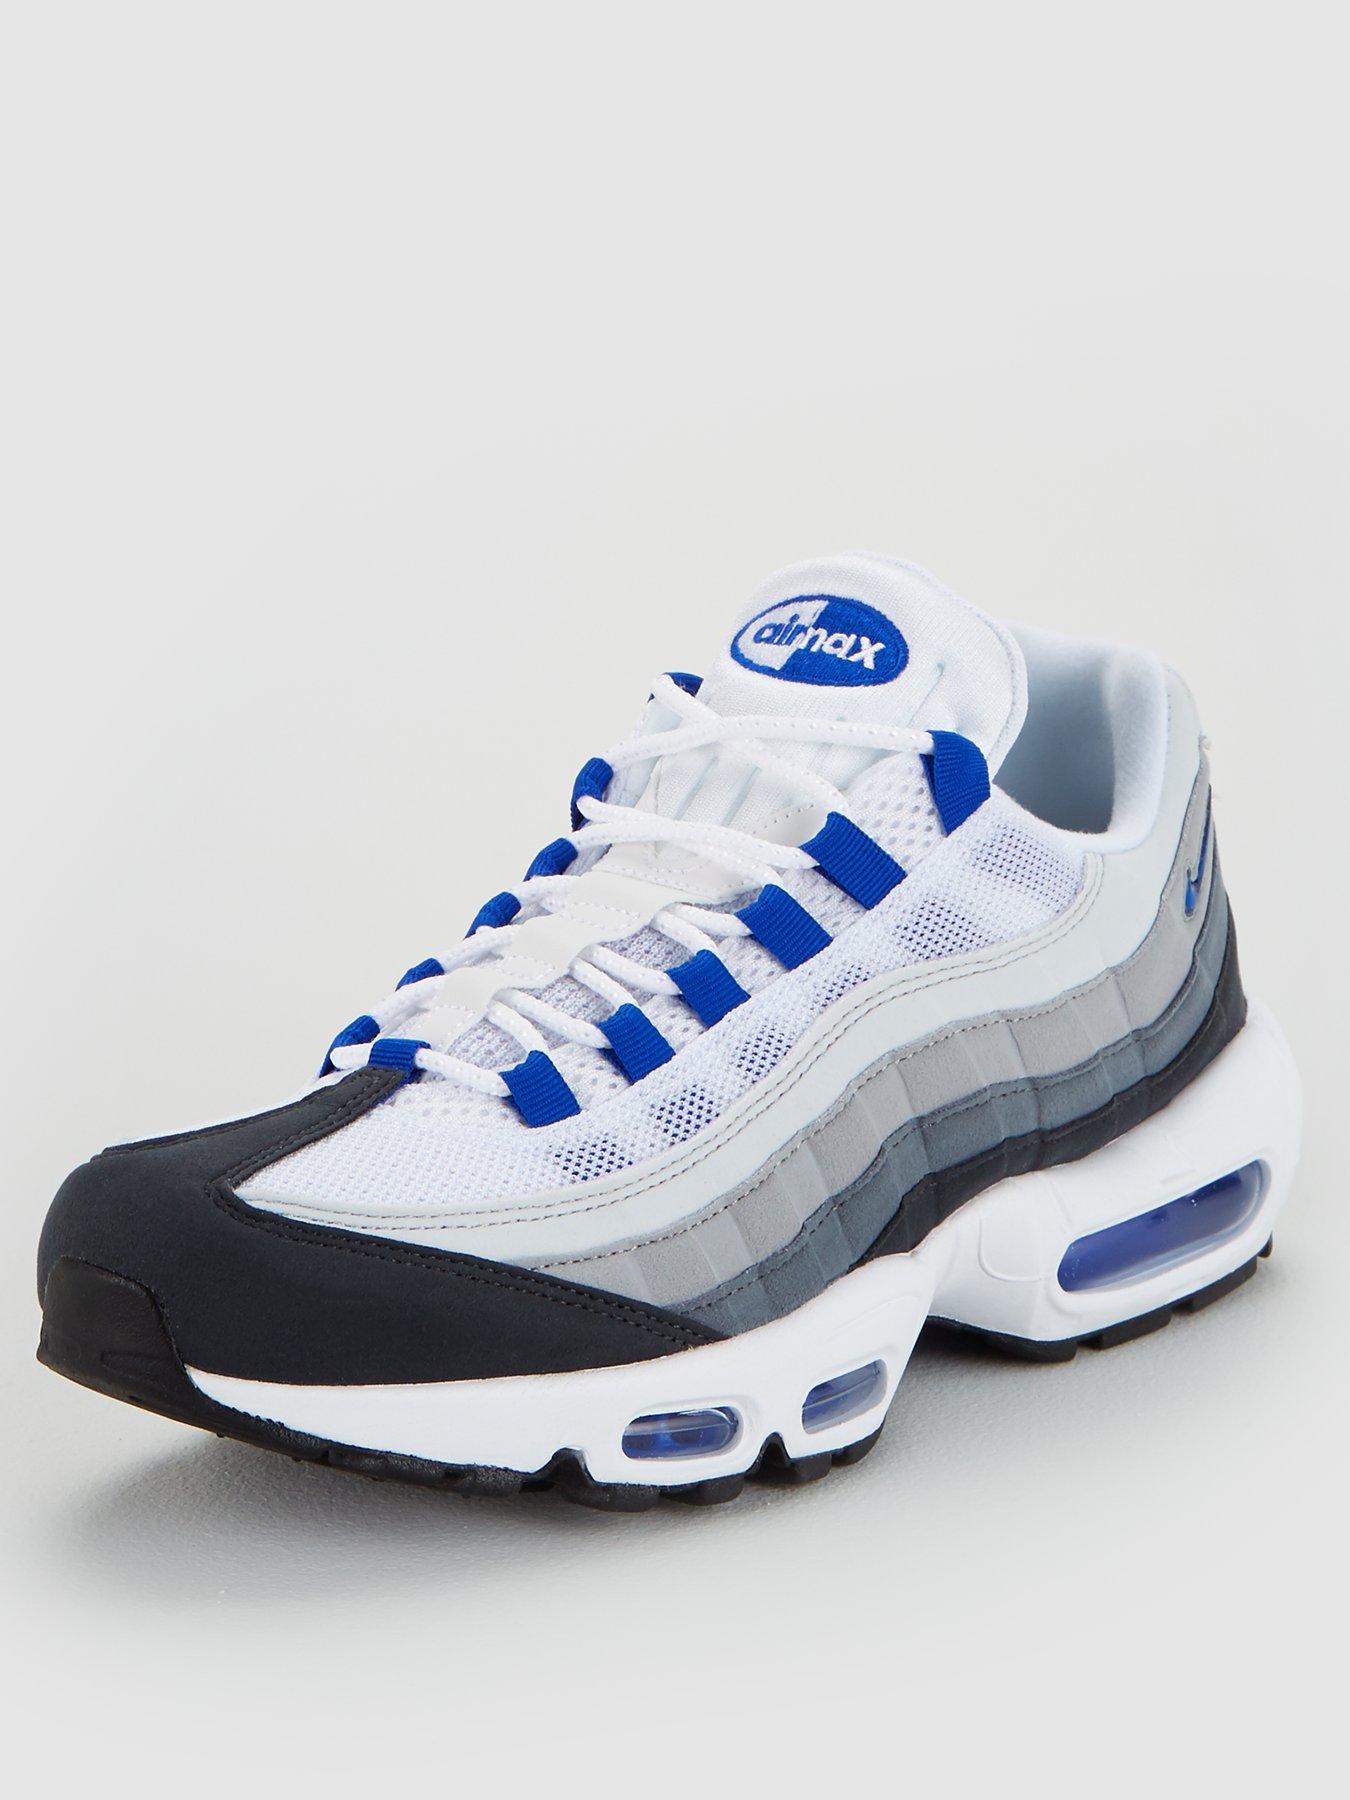 blue and white 95